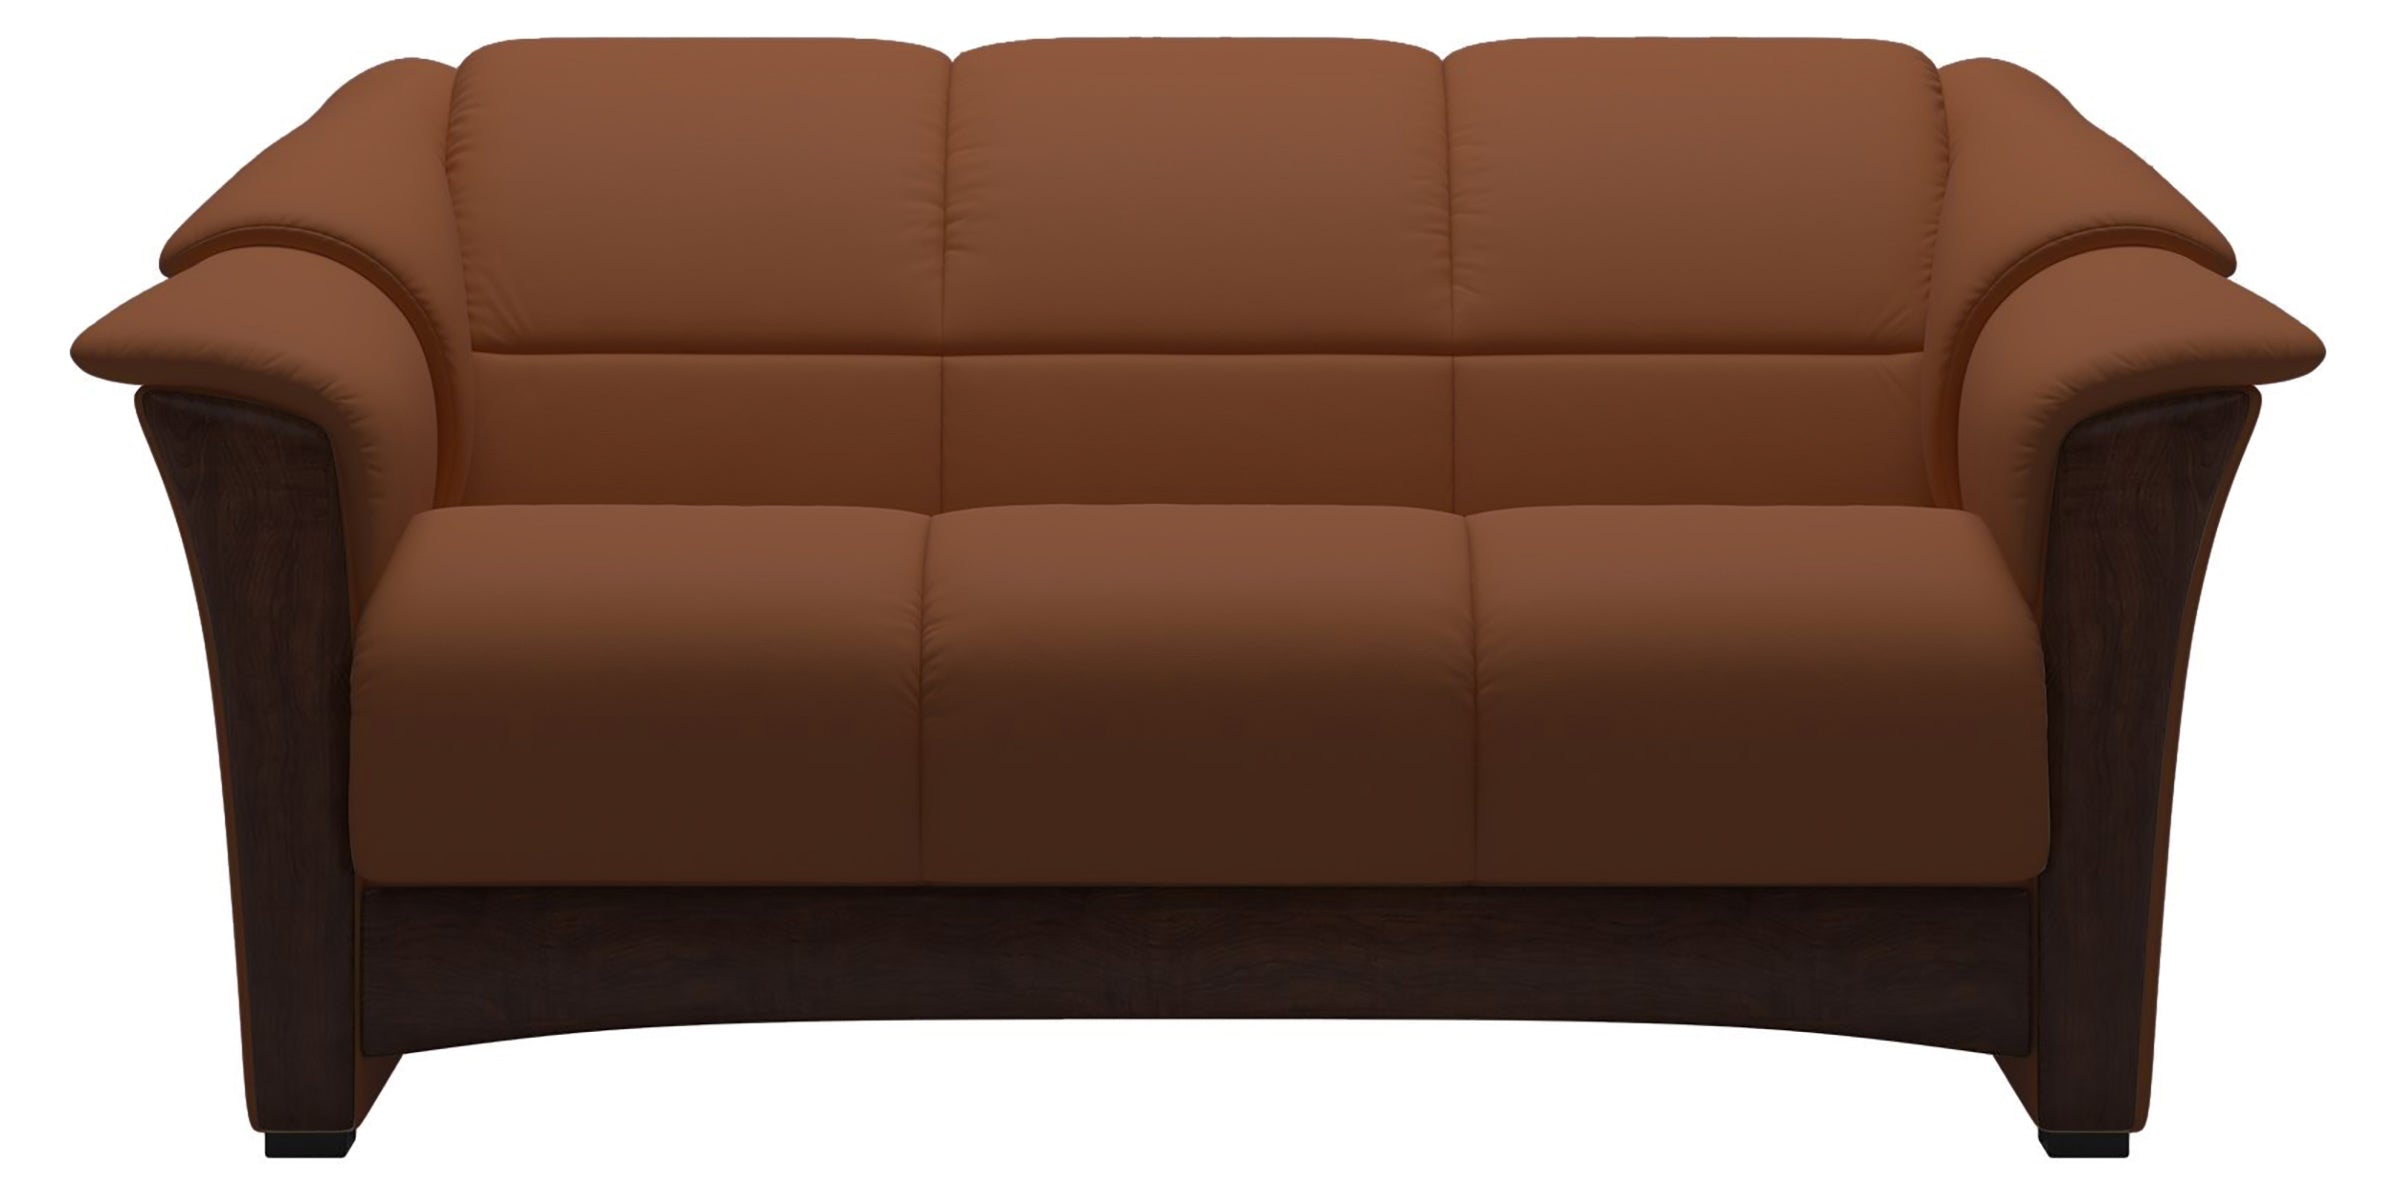 Paloma Leather New Cognac and Brown Base | Stressless Oslo Loveseat | Valley Ridge Furniture